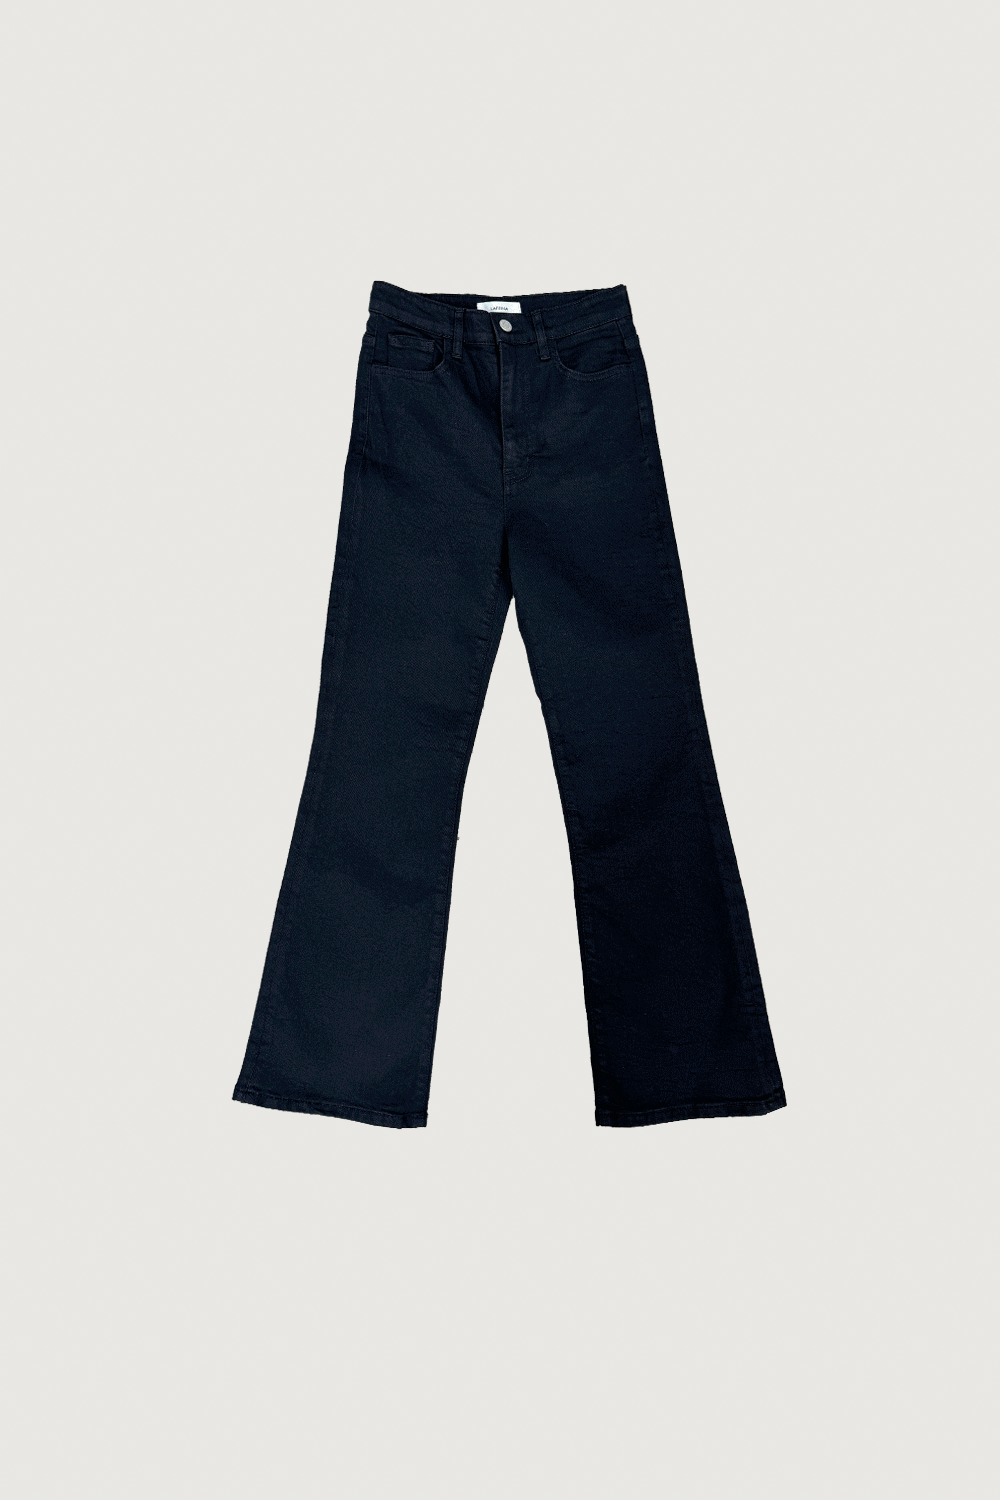 Black Bootcut Jeans (same-day shipping)